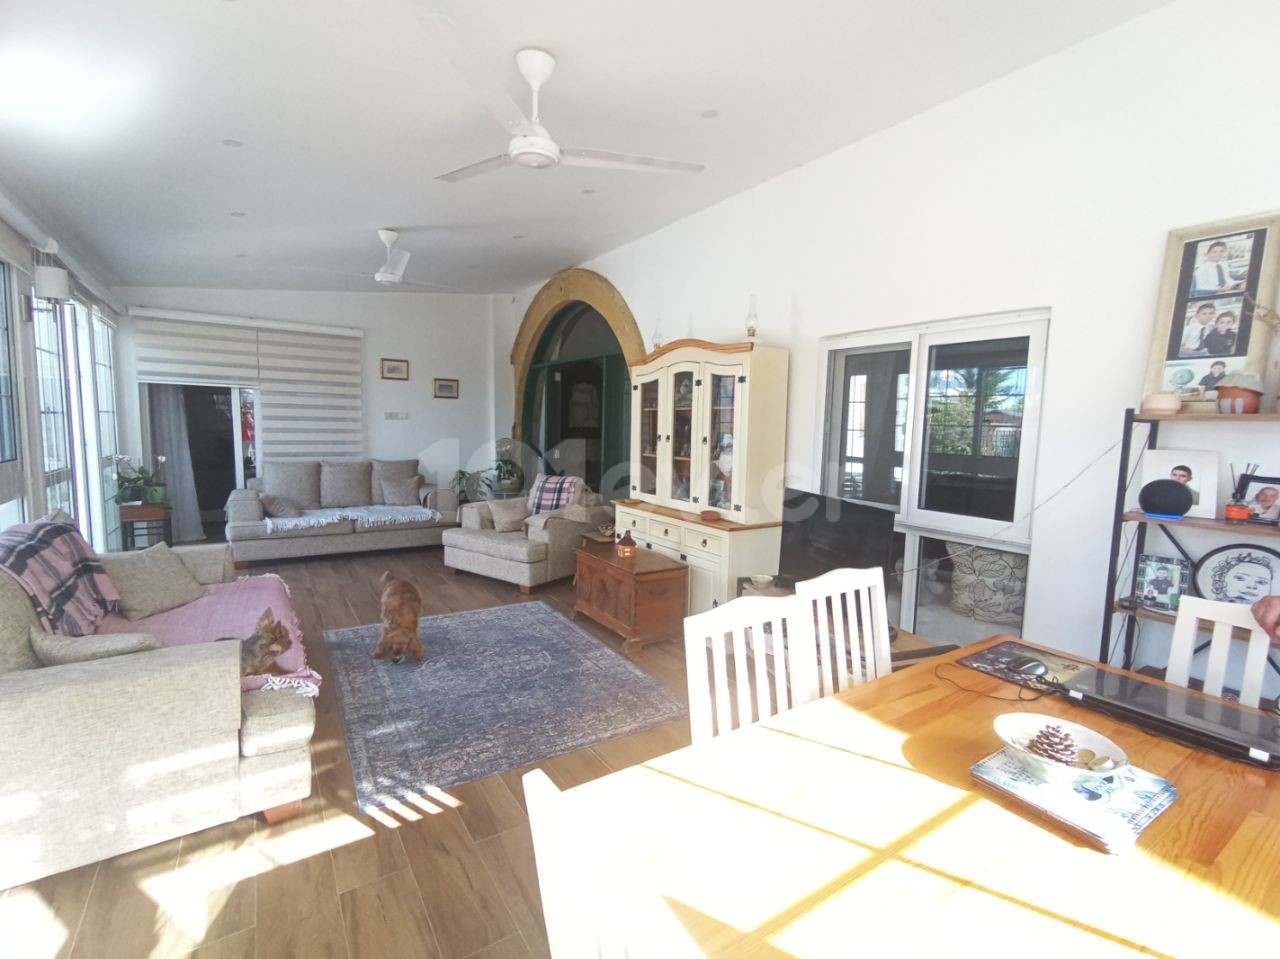 Character 2 bedroom bungalow with large garden, private pool and 1 bedroom annexe